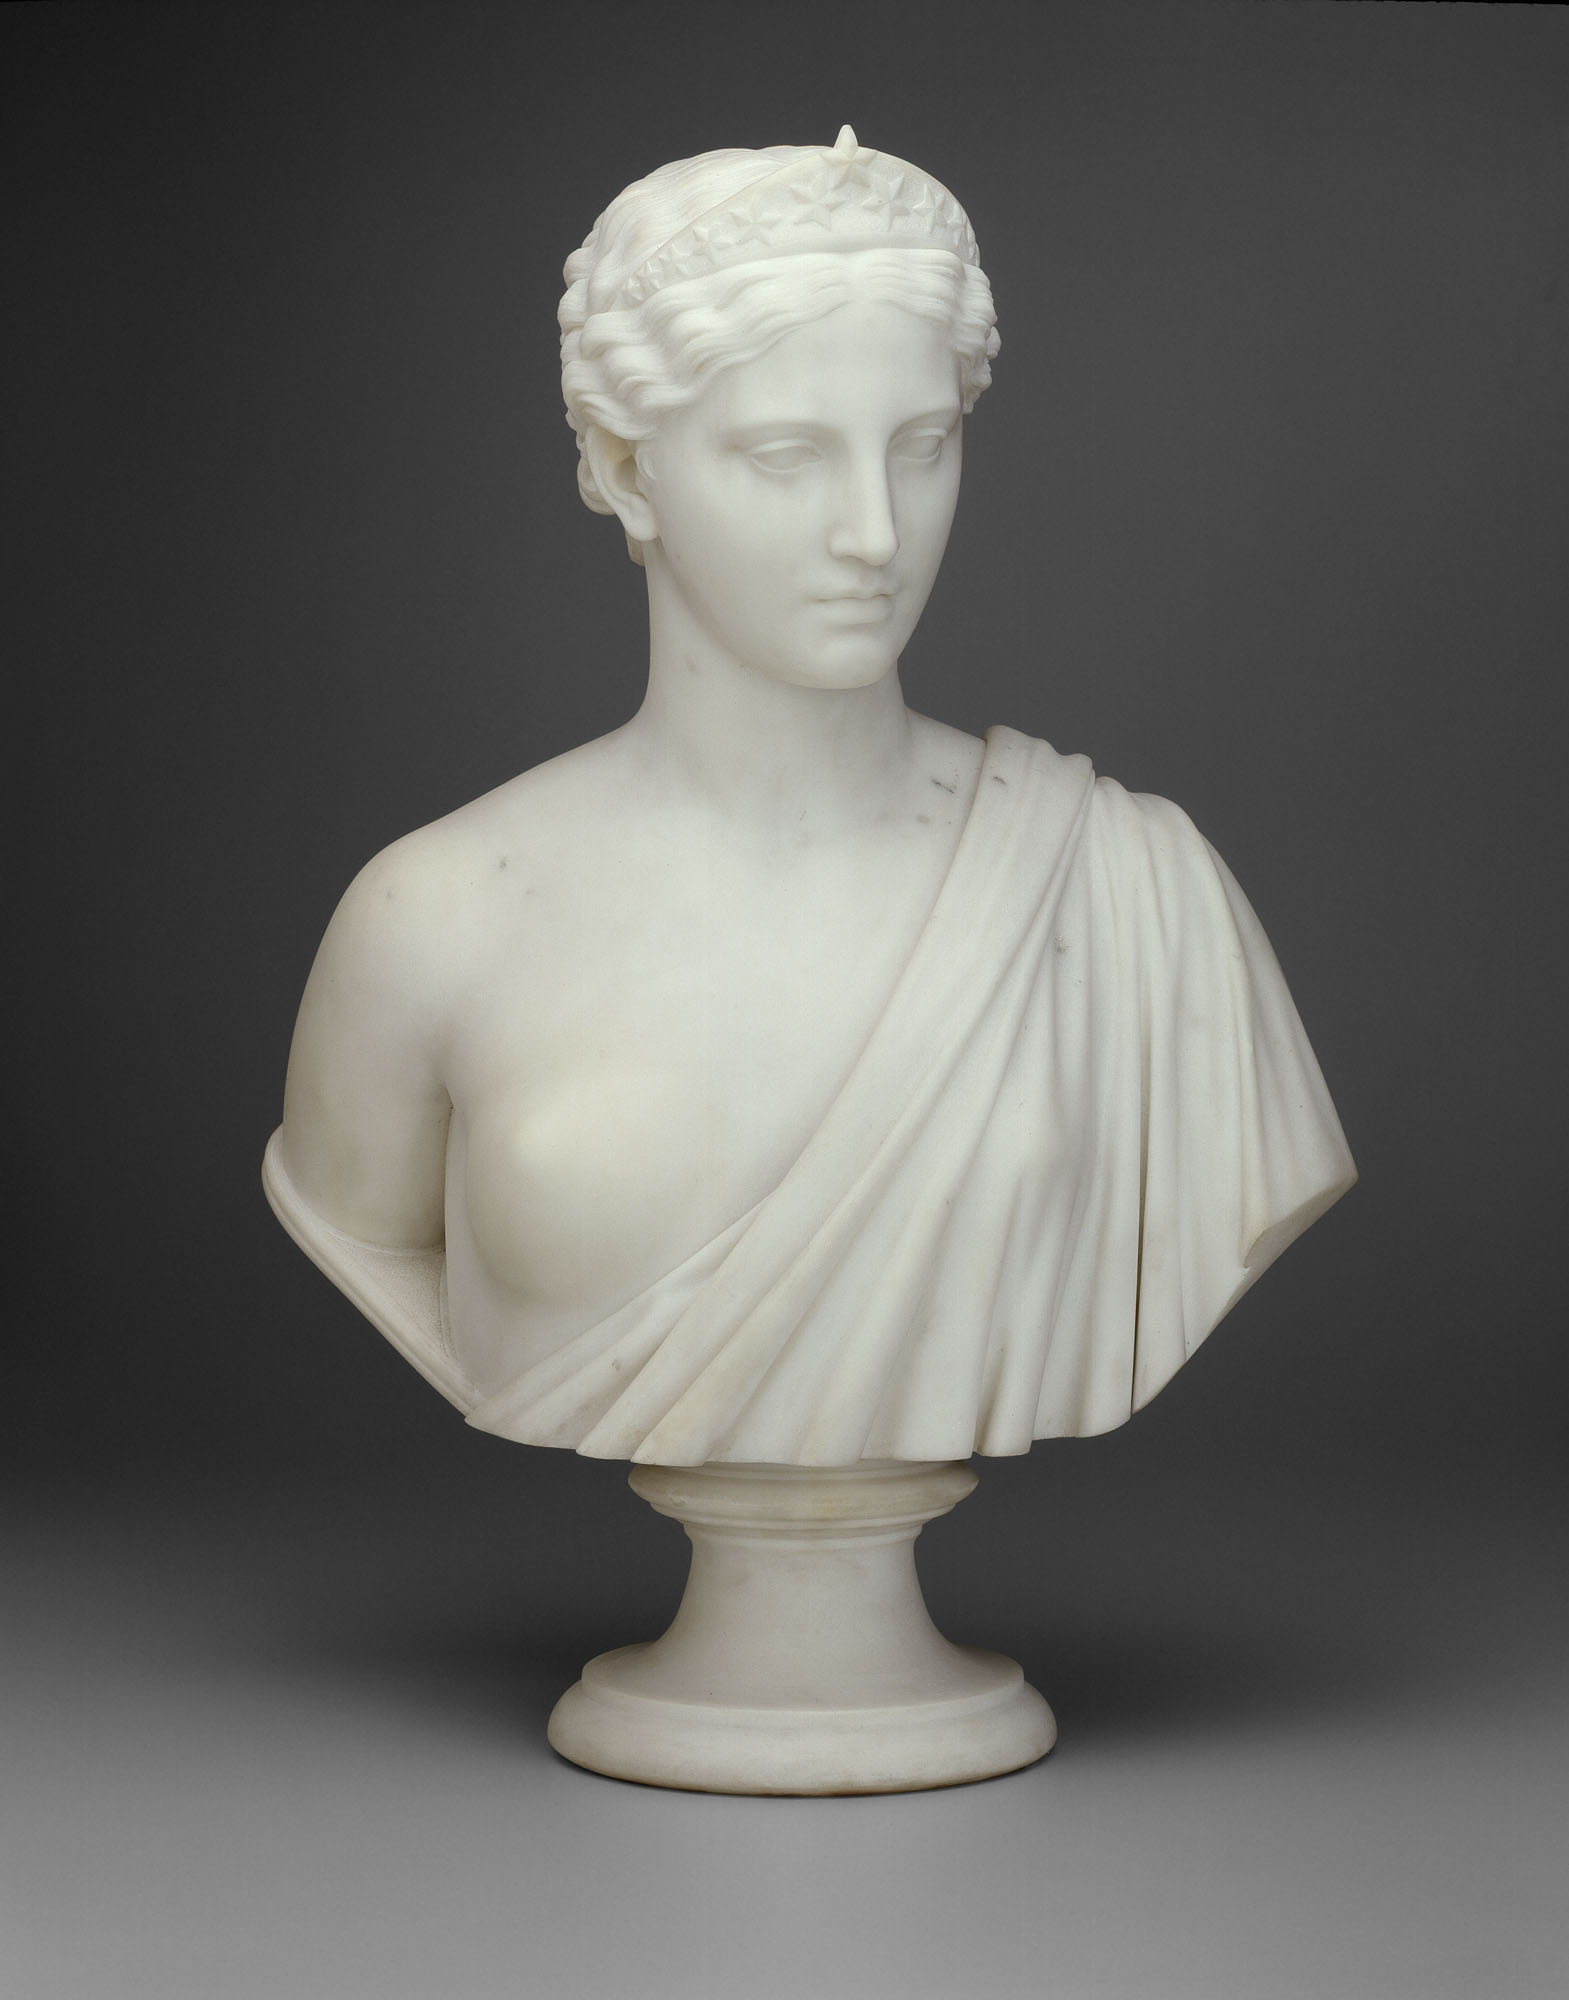 Hiram Powers, America, 1850–54, marble, 29 inches (The Art Institute of Chicago)